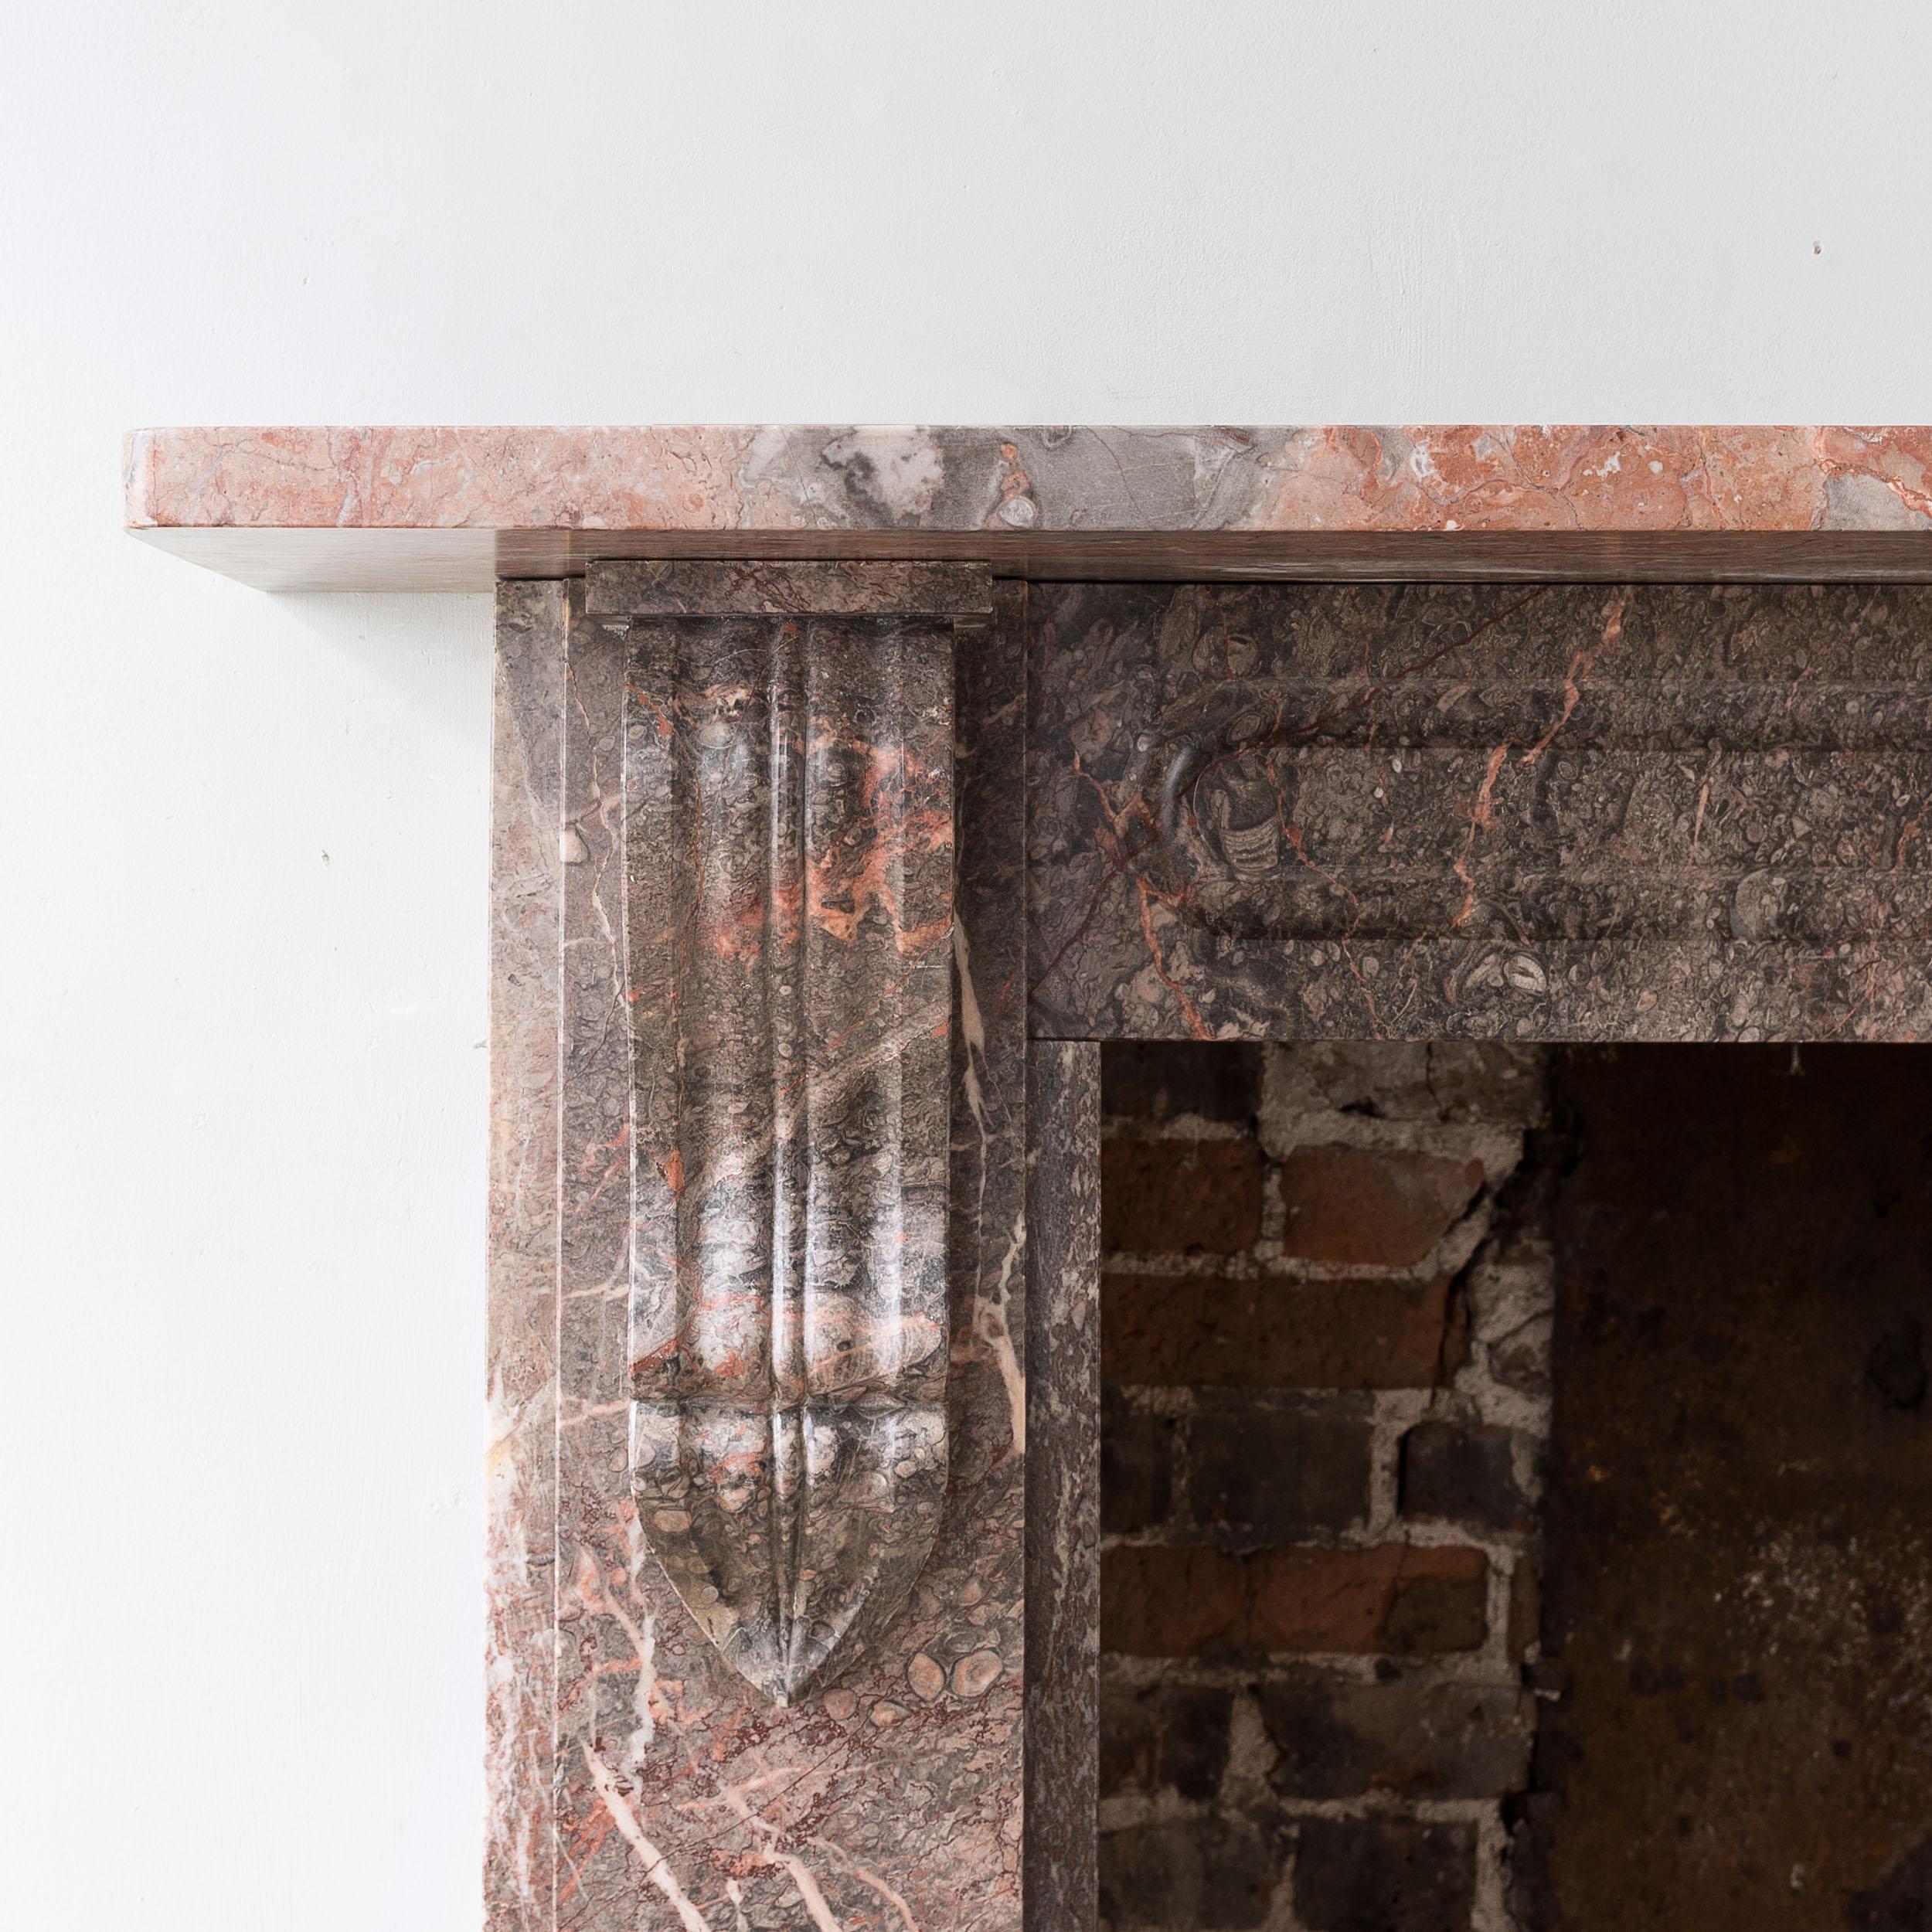 Early Victorian Ashburton marble fireplace, c.1840, with elongated corbels supporting the plain shelf, the frieze with channel-mould.

Opening width 90.5 cm x 96 cm high, Outside jamb to jamb 135 cm